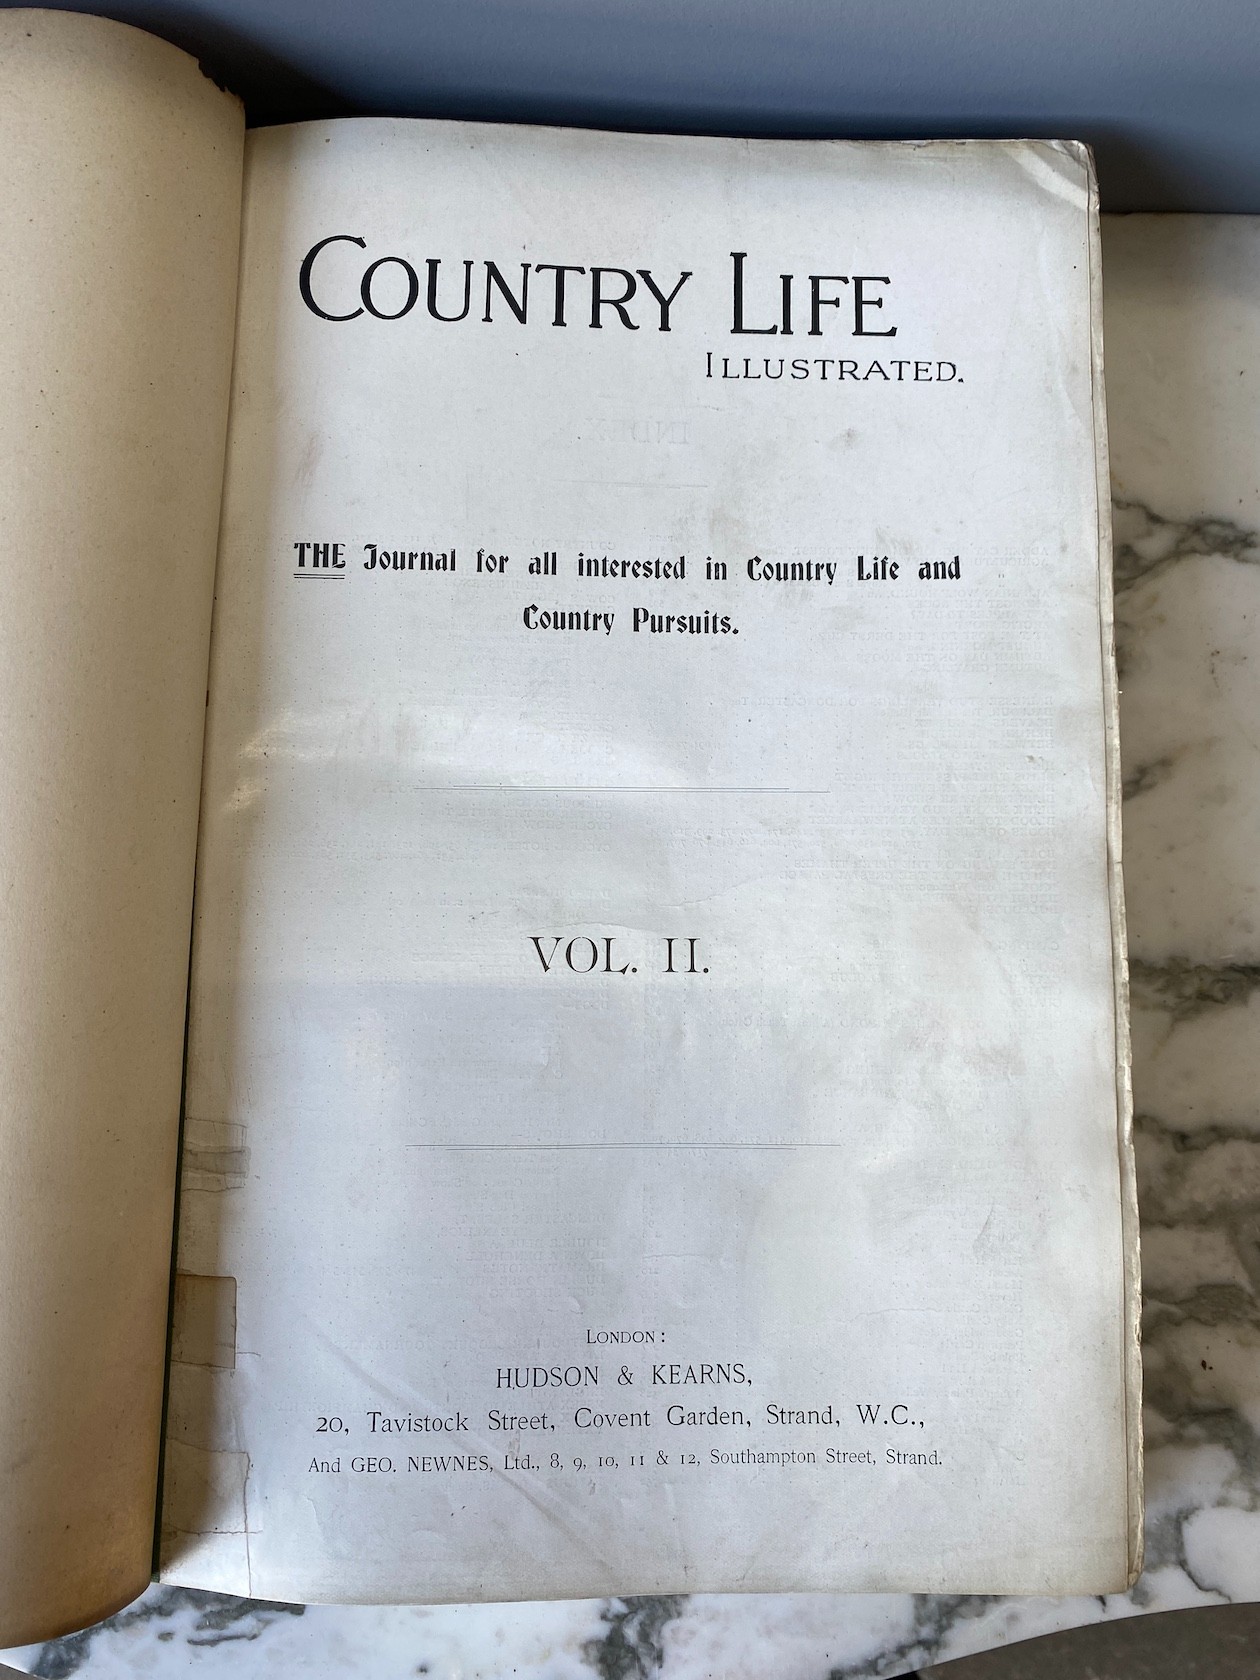 Country Life, vol.1-166 but lacking vol.34, 1897-1979 and various other later issues. *Please note the sale commences at 9am.